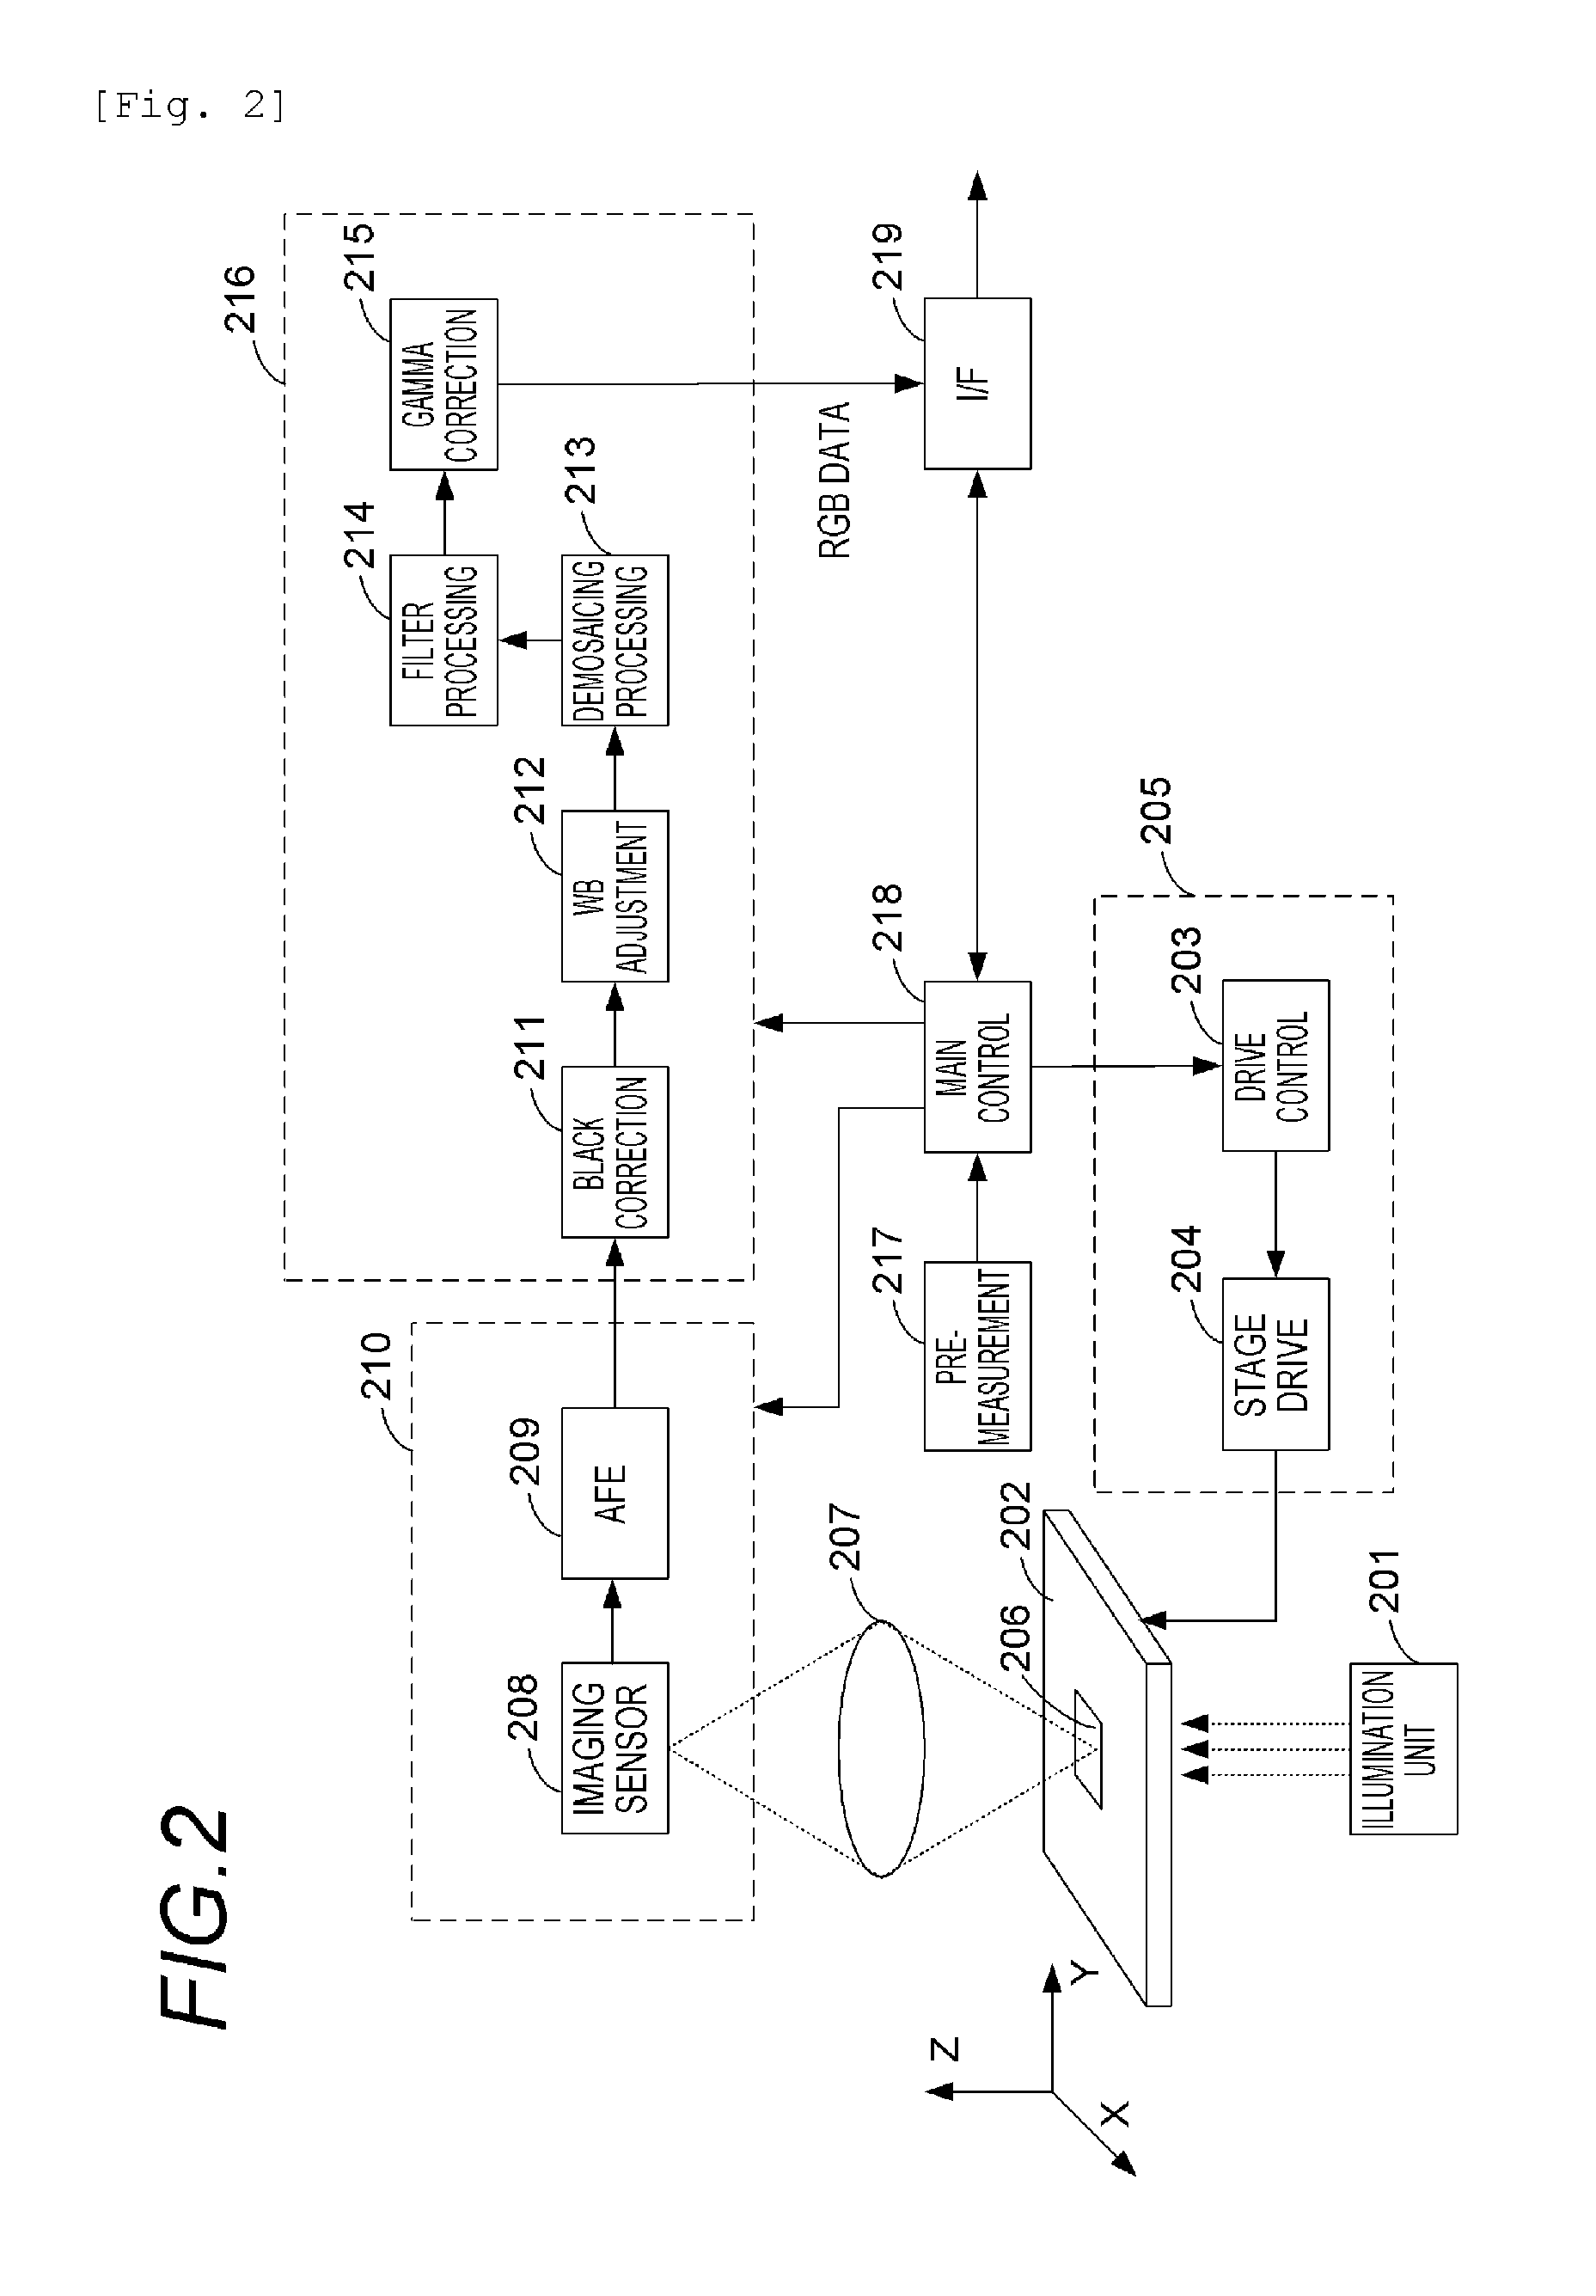 Image processing apparatus, imaging system, and image processing system